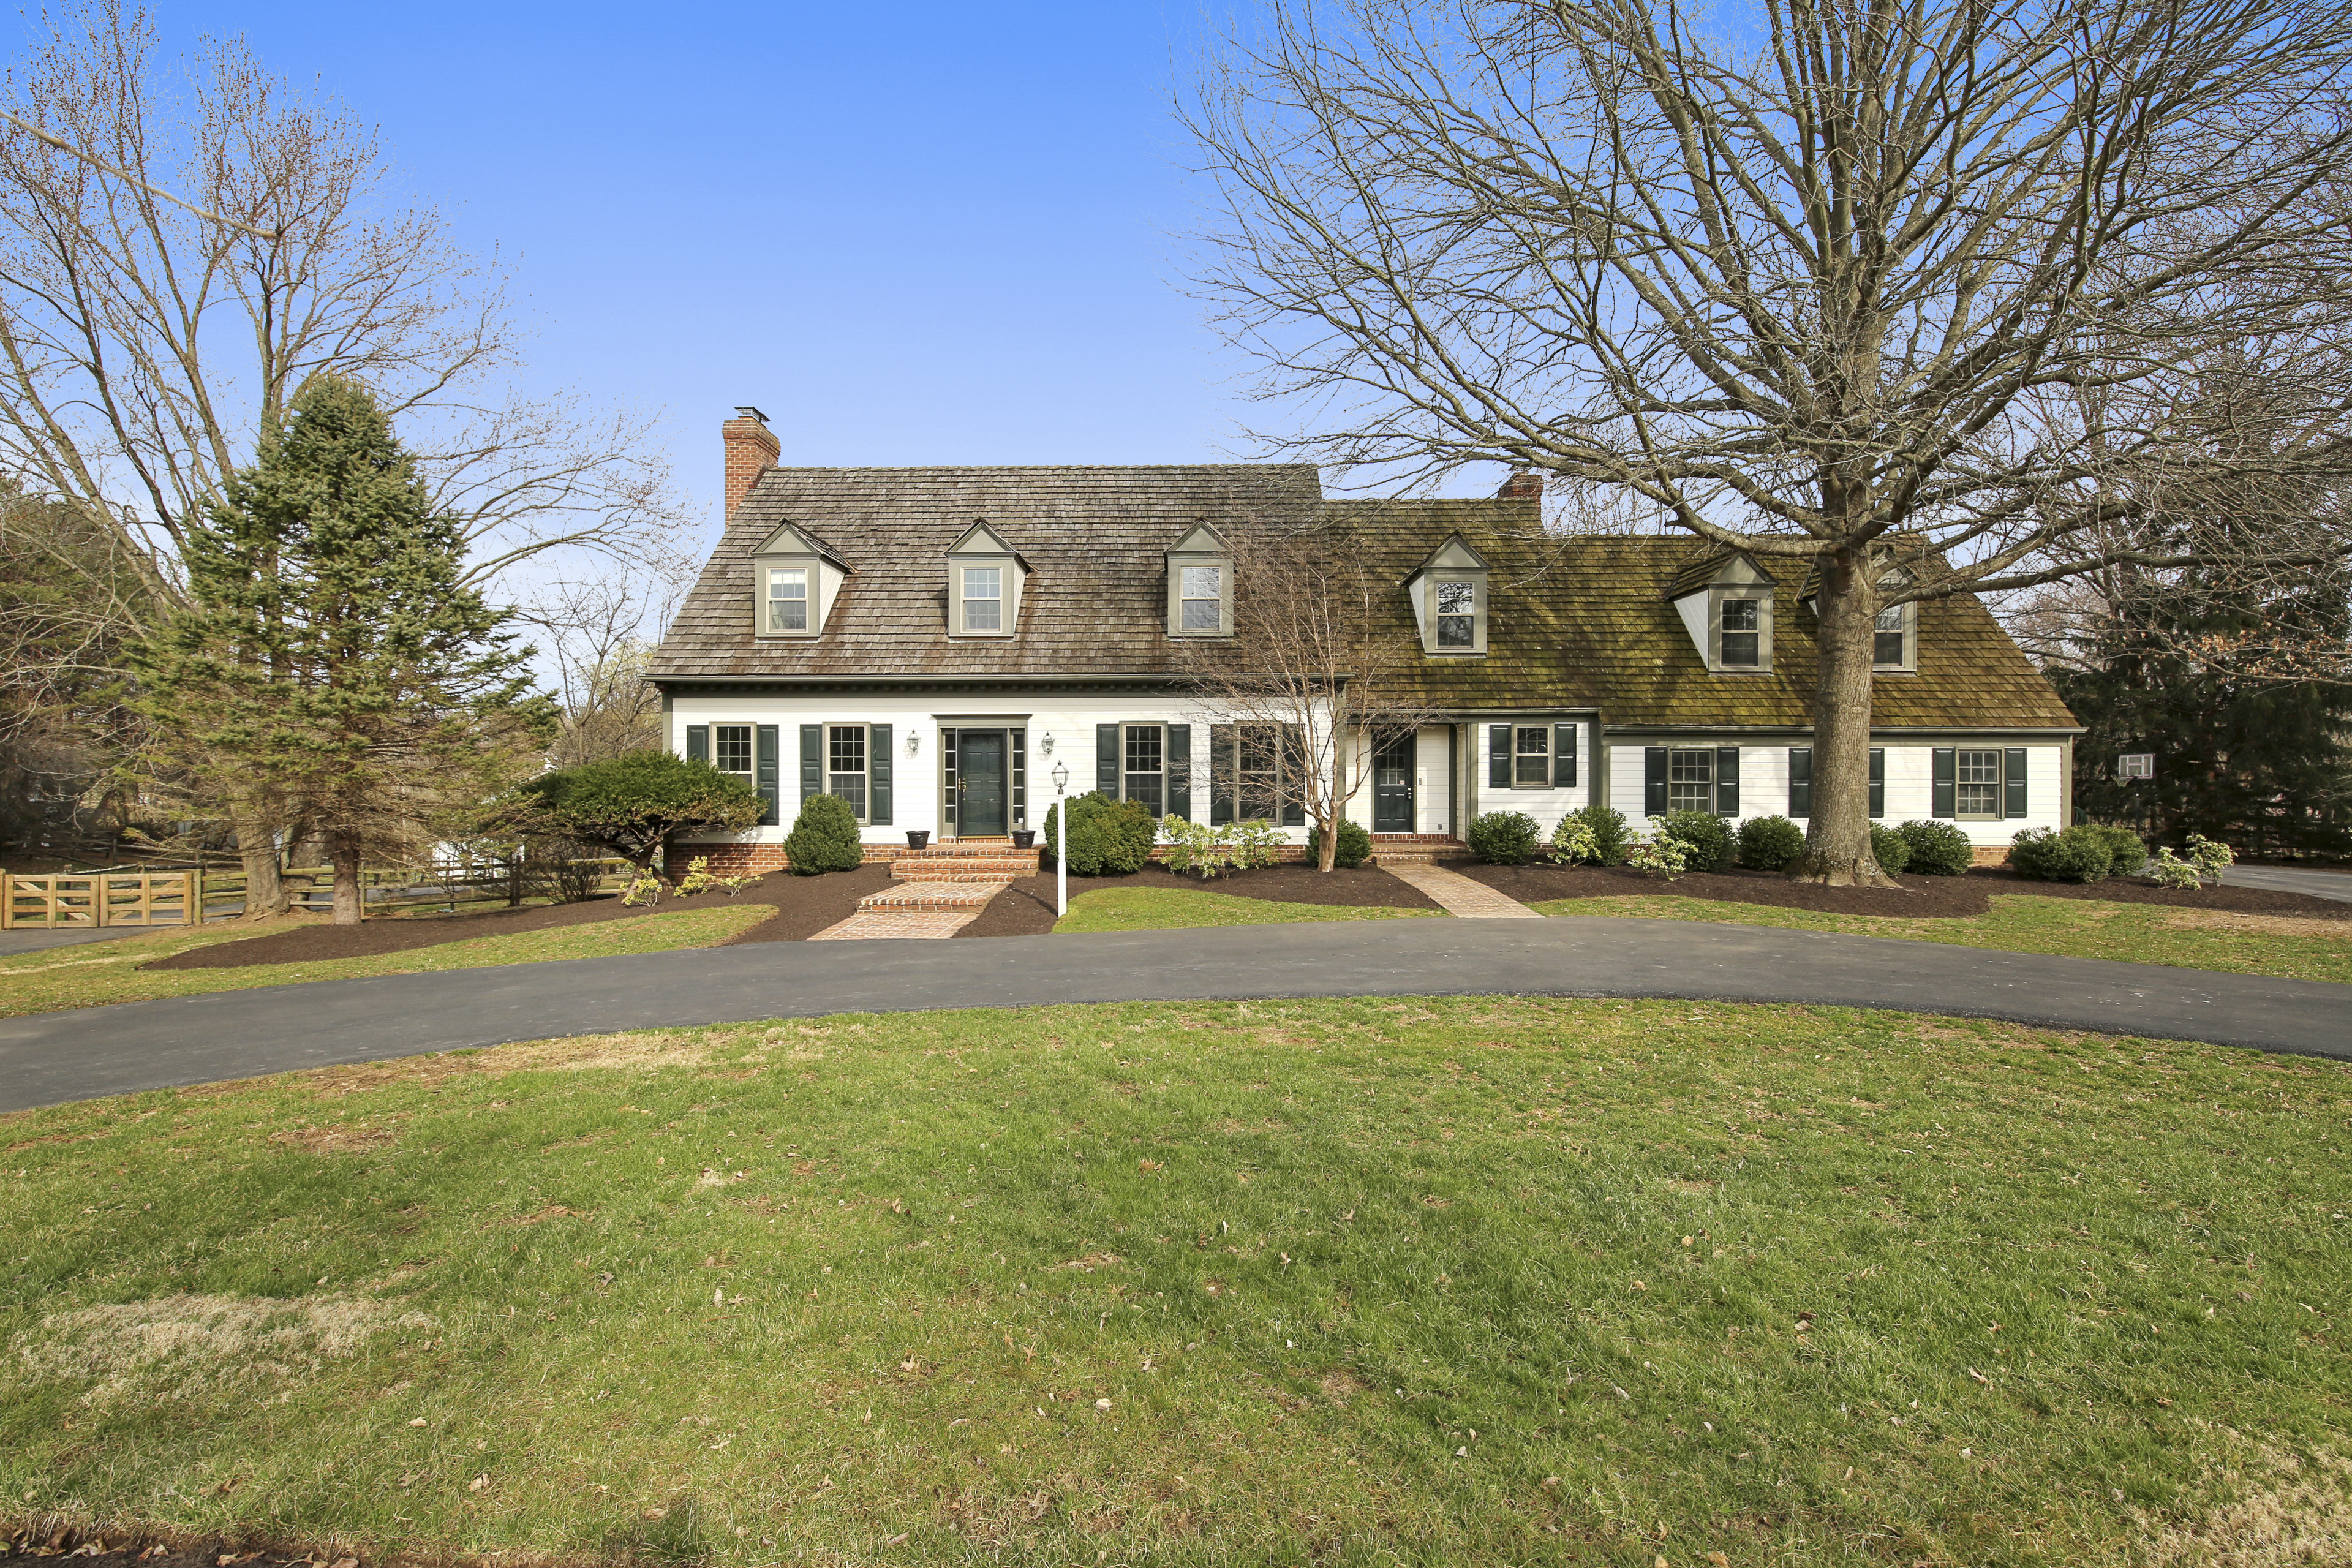 JUST LISTED: EQUESTRIAN ESTATE IN POTOMAC